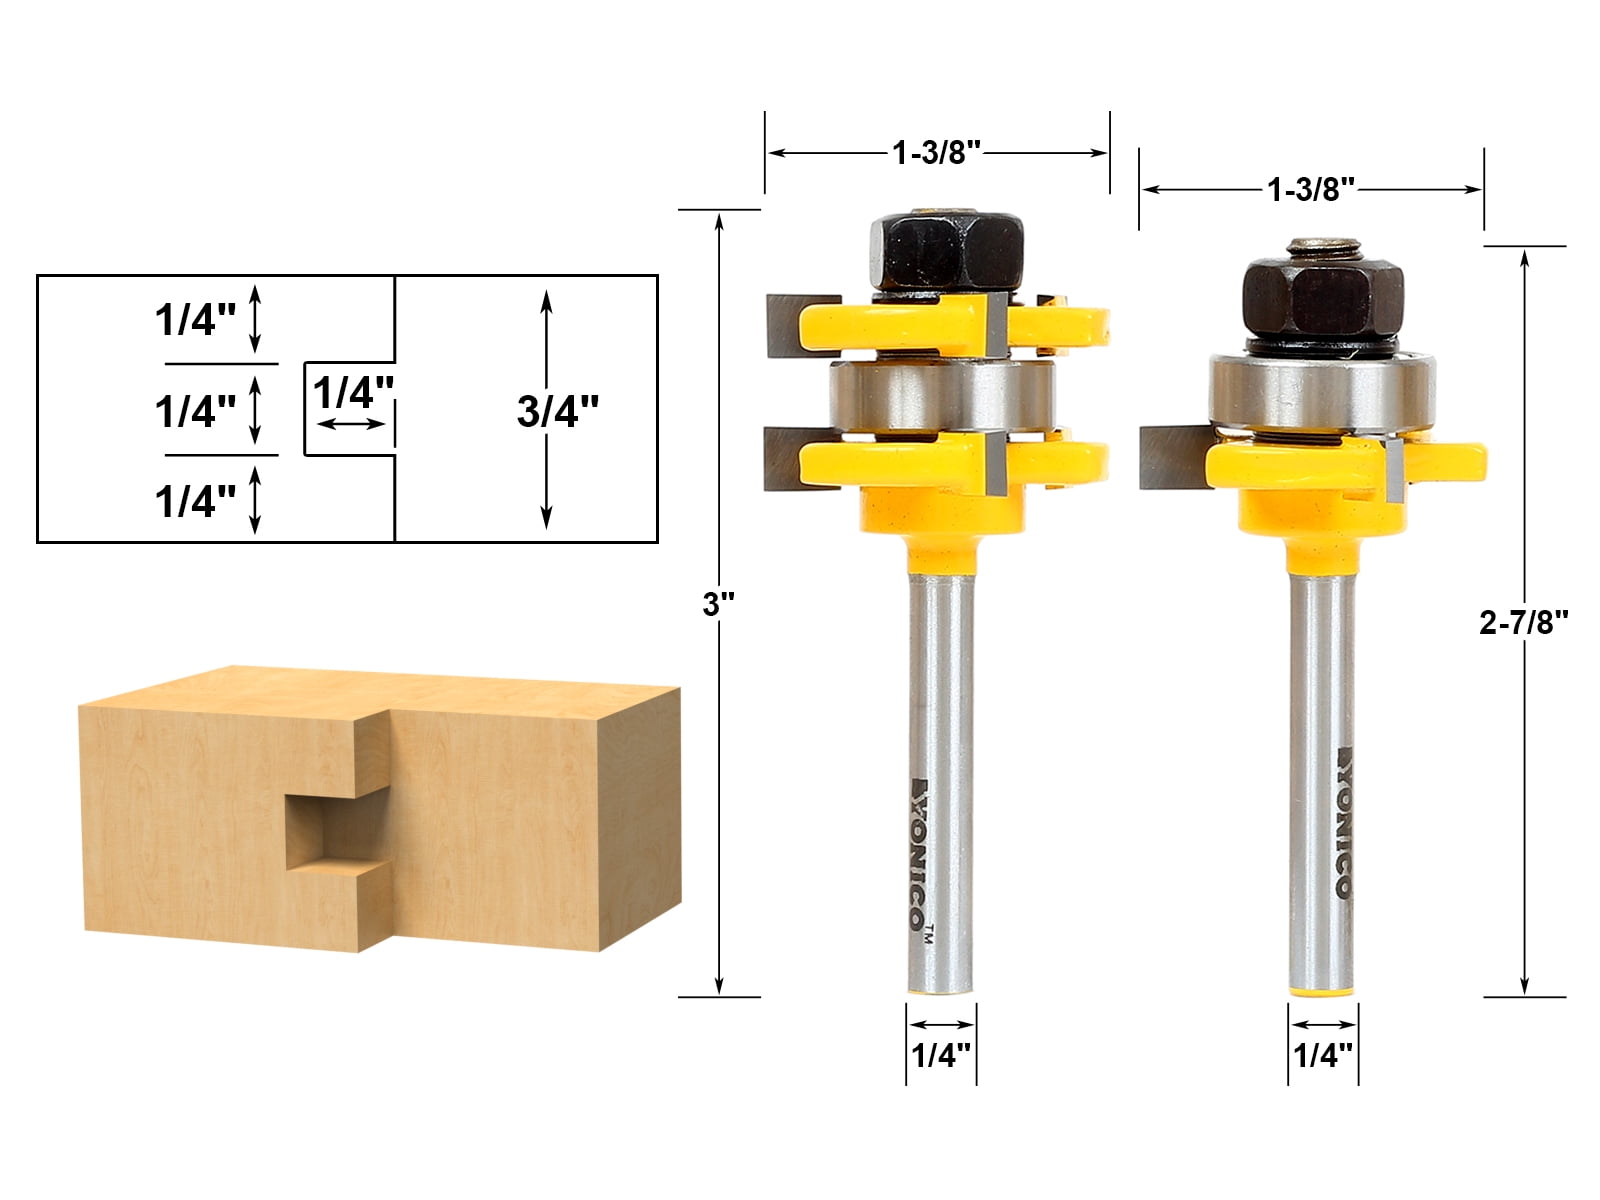 1/4" 1/2" Shank T-type 3-tooth Useful Cutter Hot Tongue & Groove Router Bit Set 